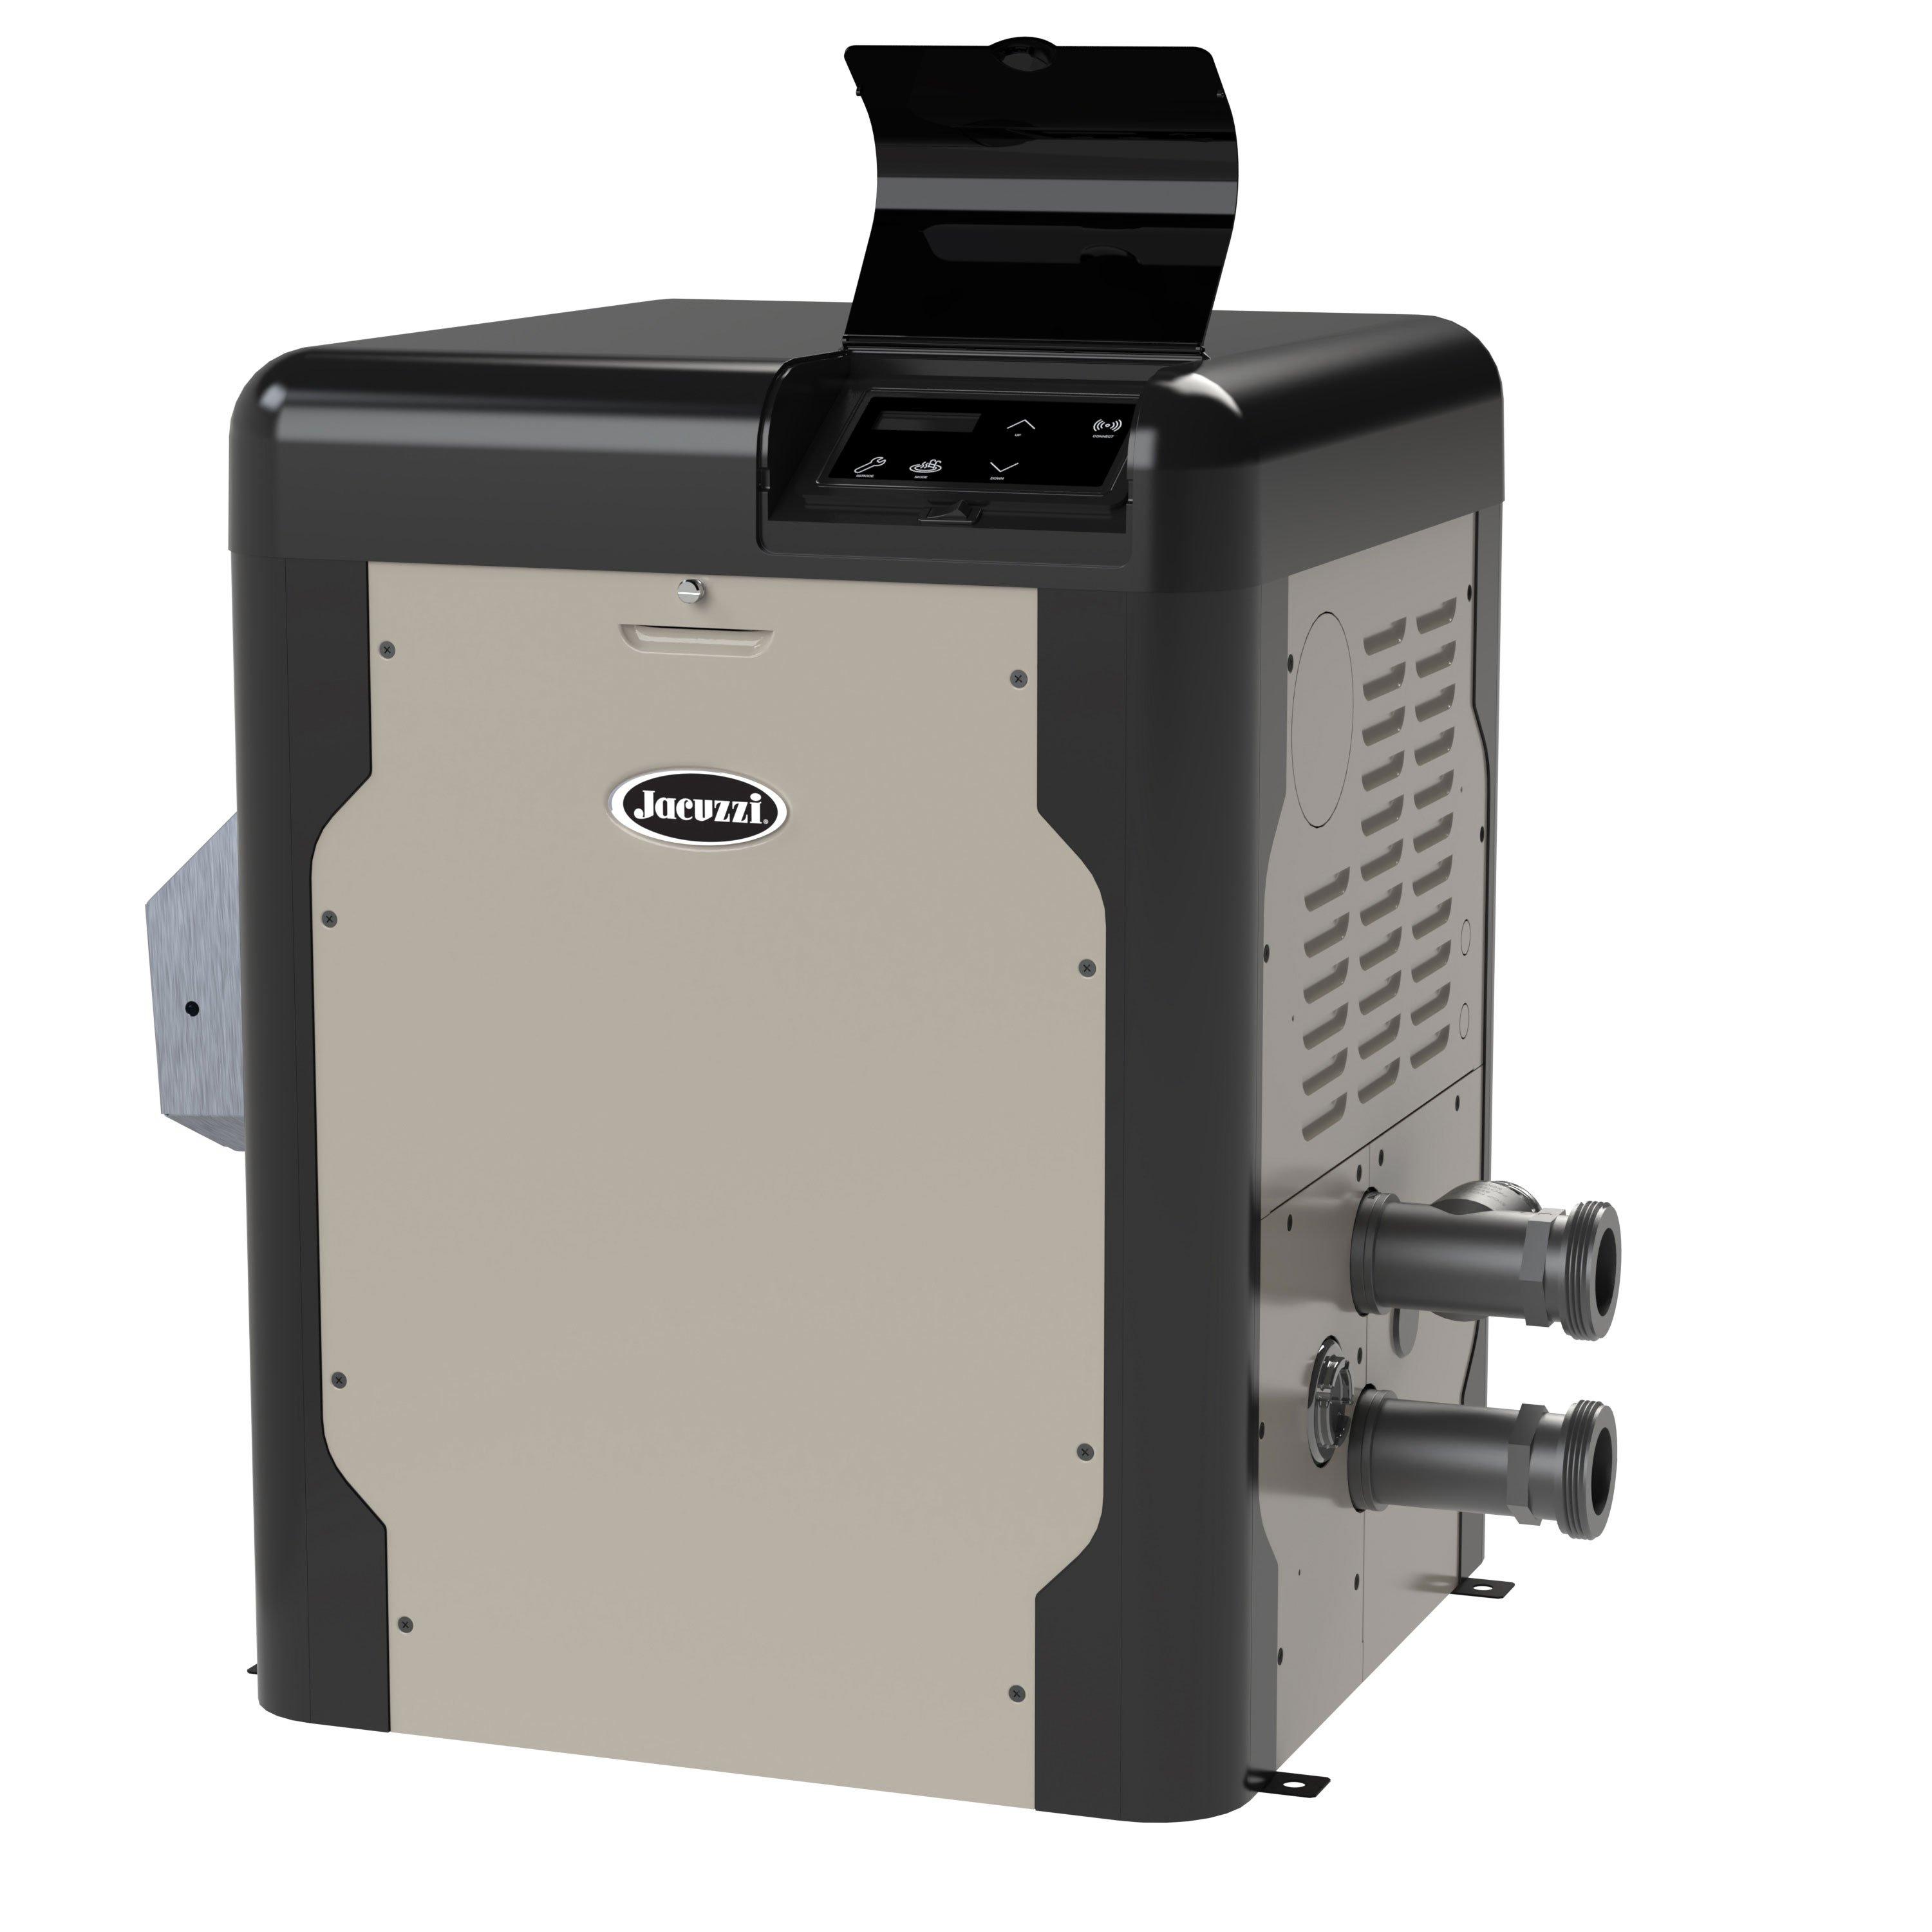 natural gas heater for best pool heater comparison